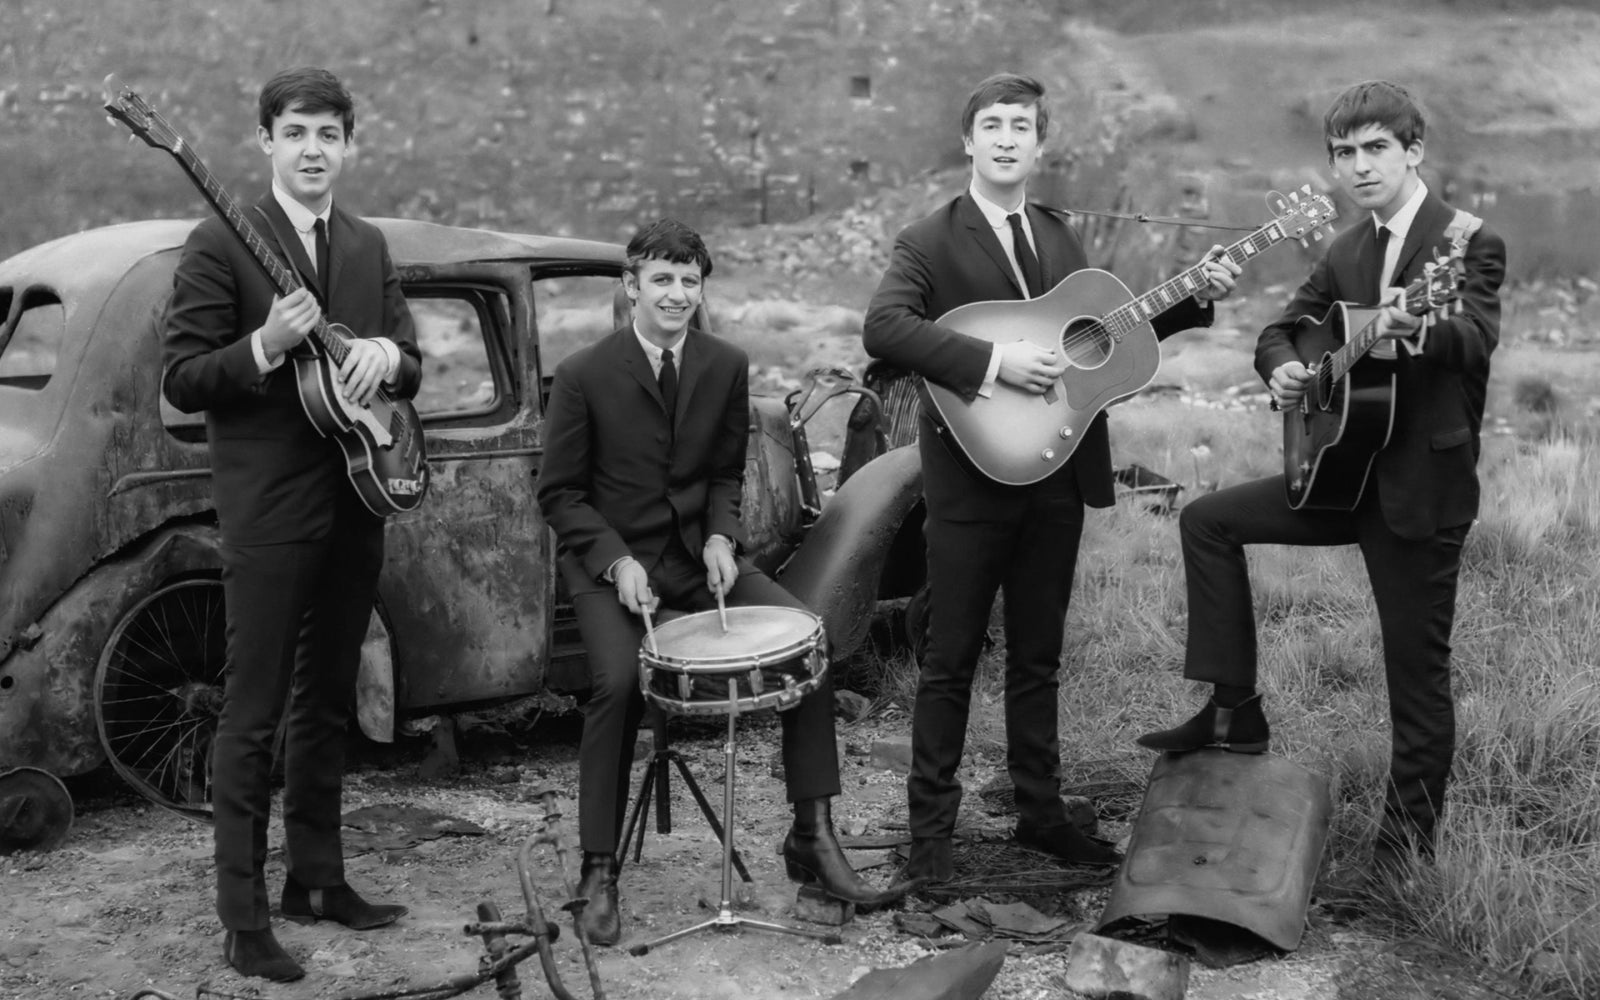 The boots The Beatles would wear today - Lucchese